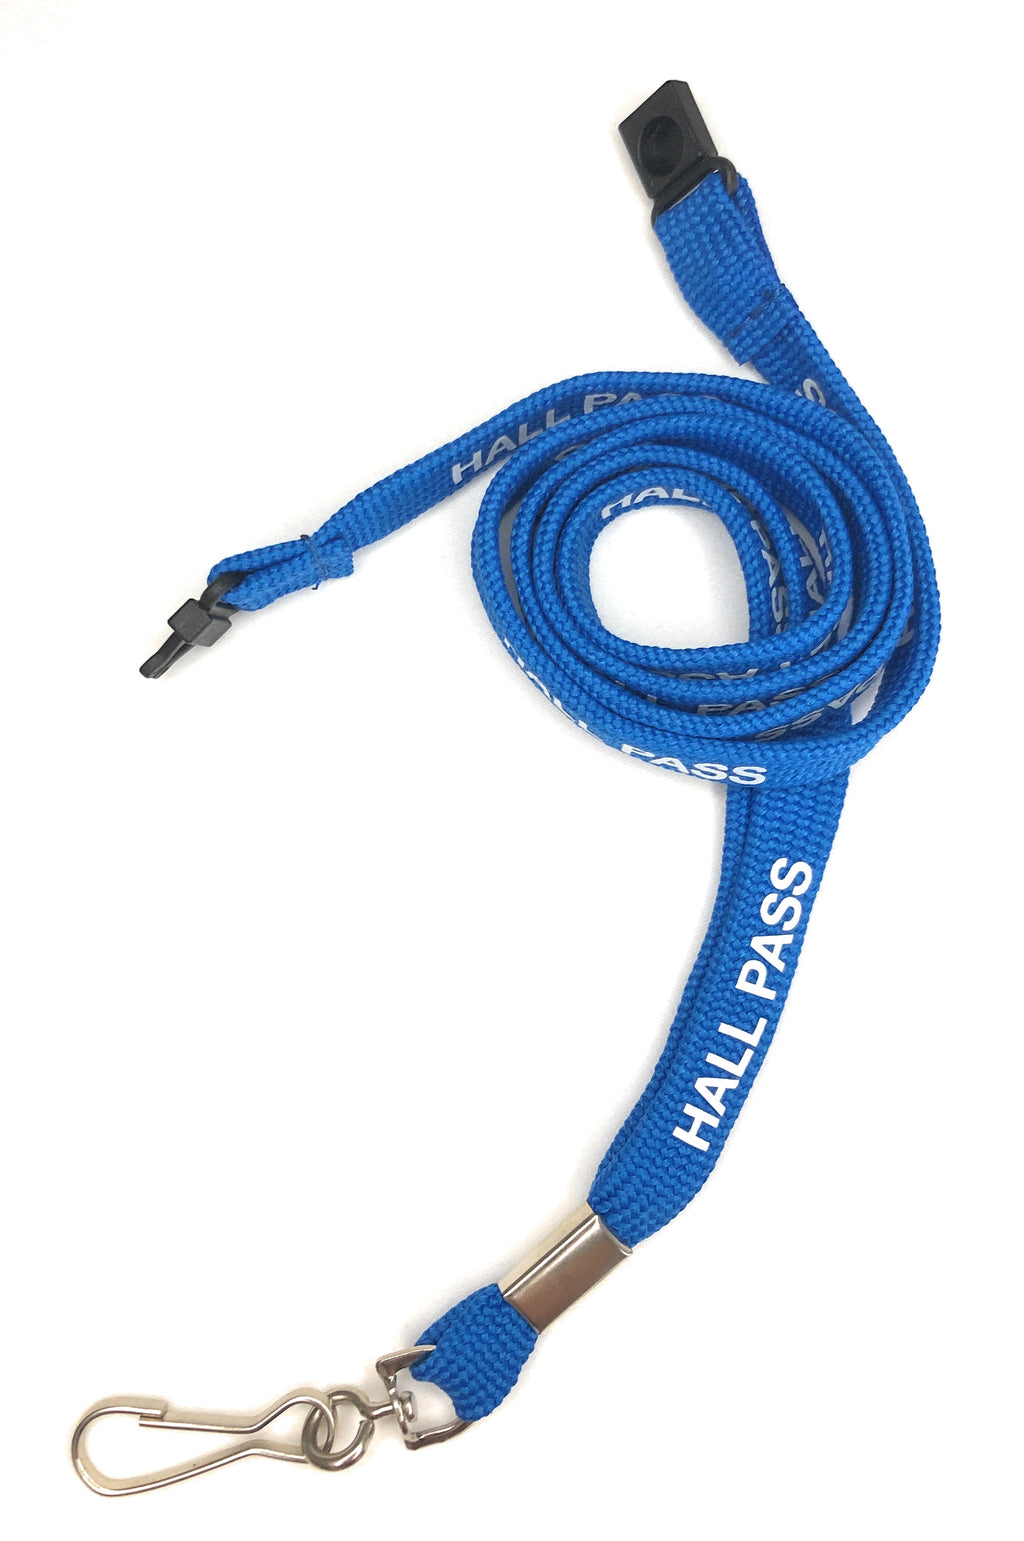 Hydration Pack Drink Tube Lanyard Clip